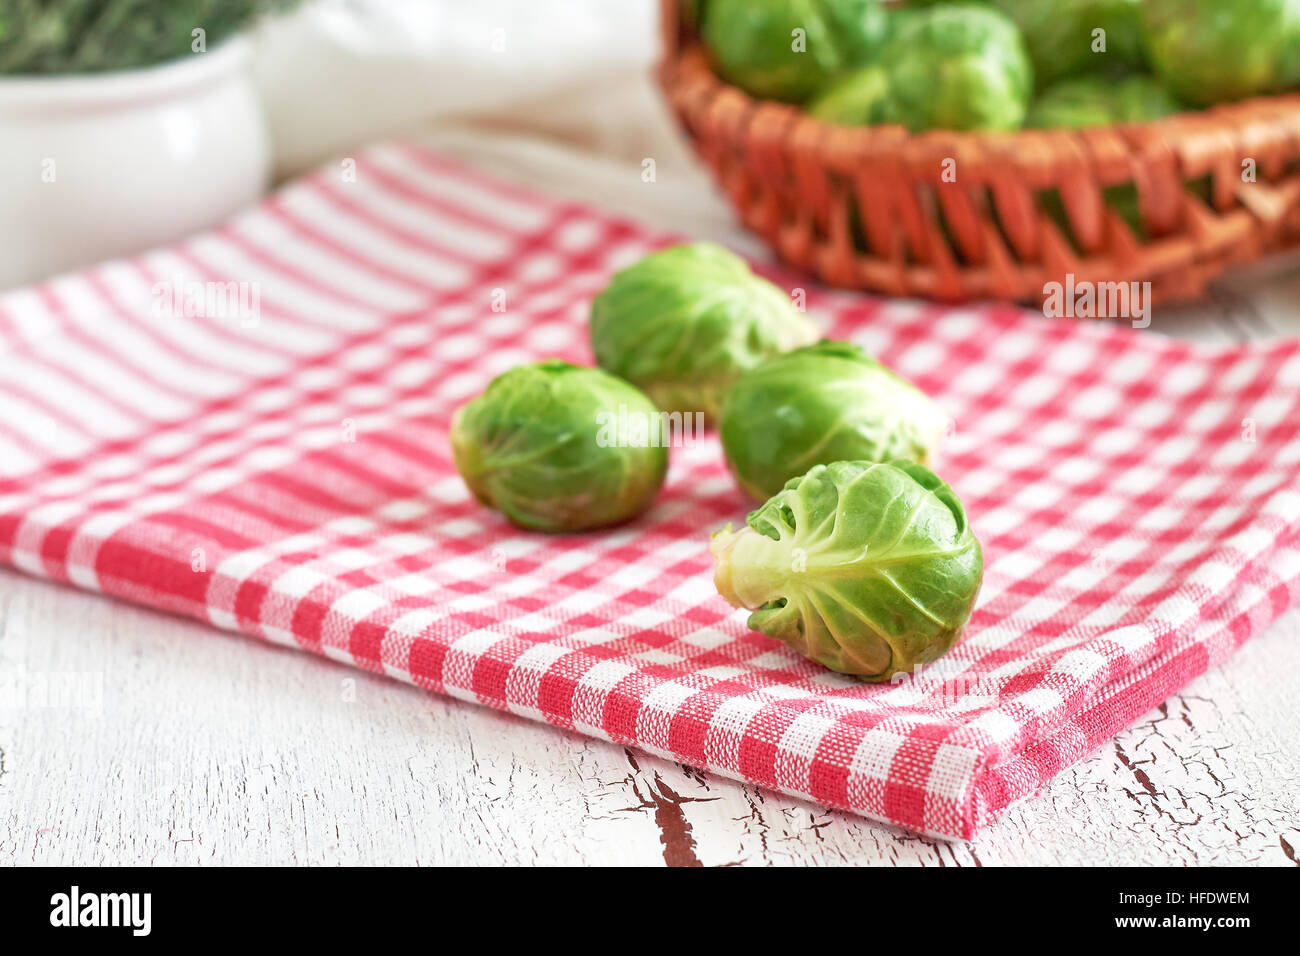 Fresh raw brussel sprouts on white rustic wooden background Stock Photo